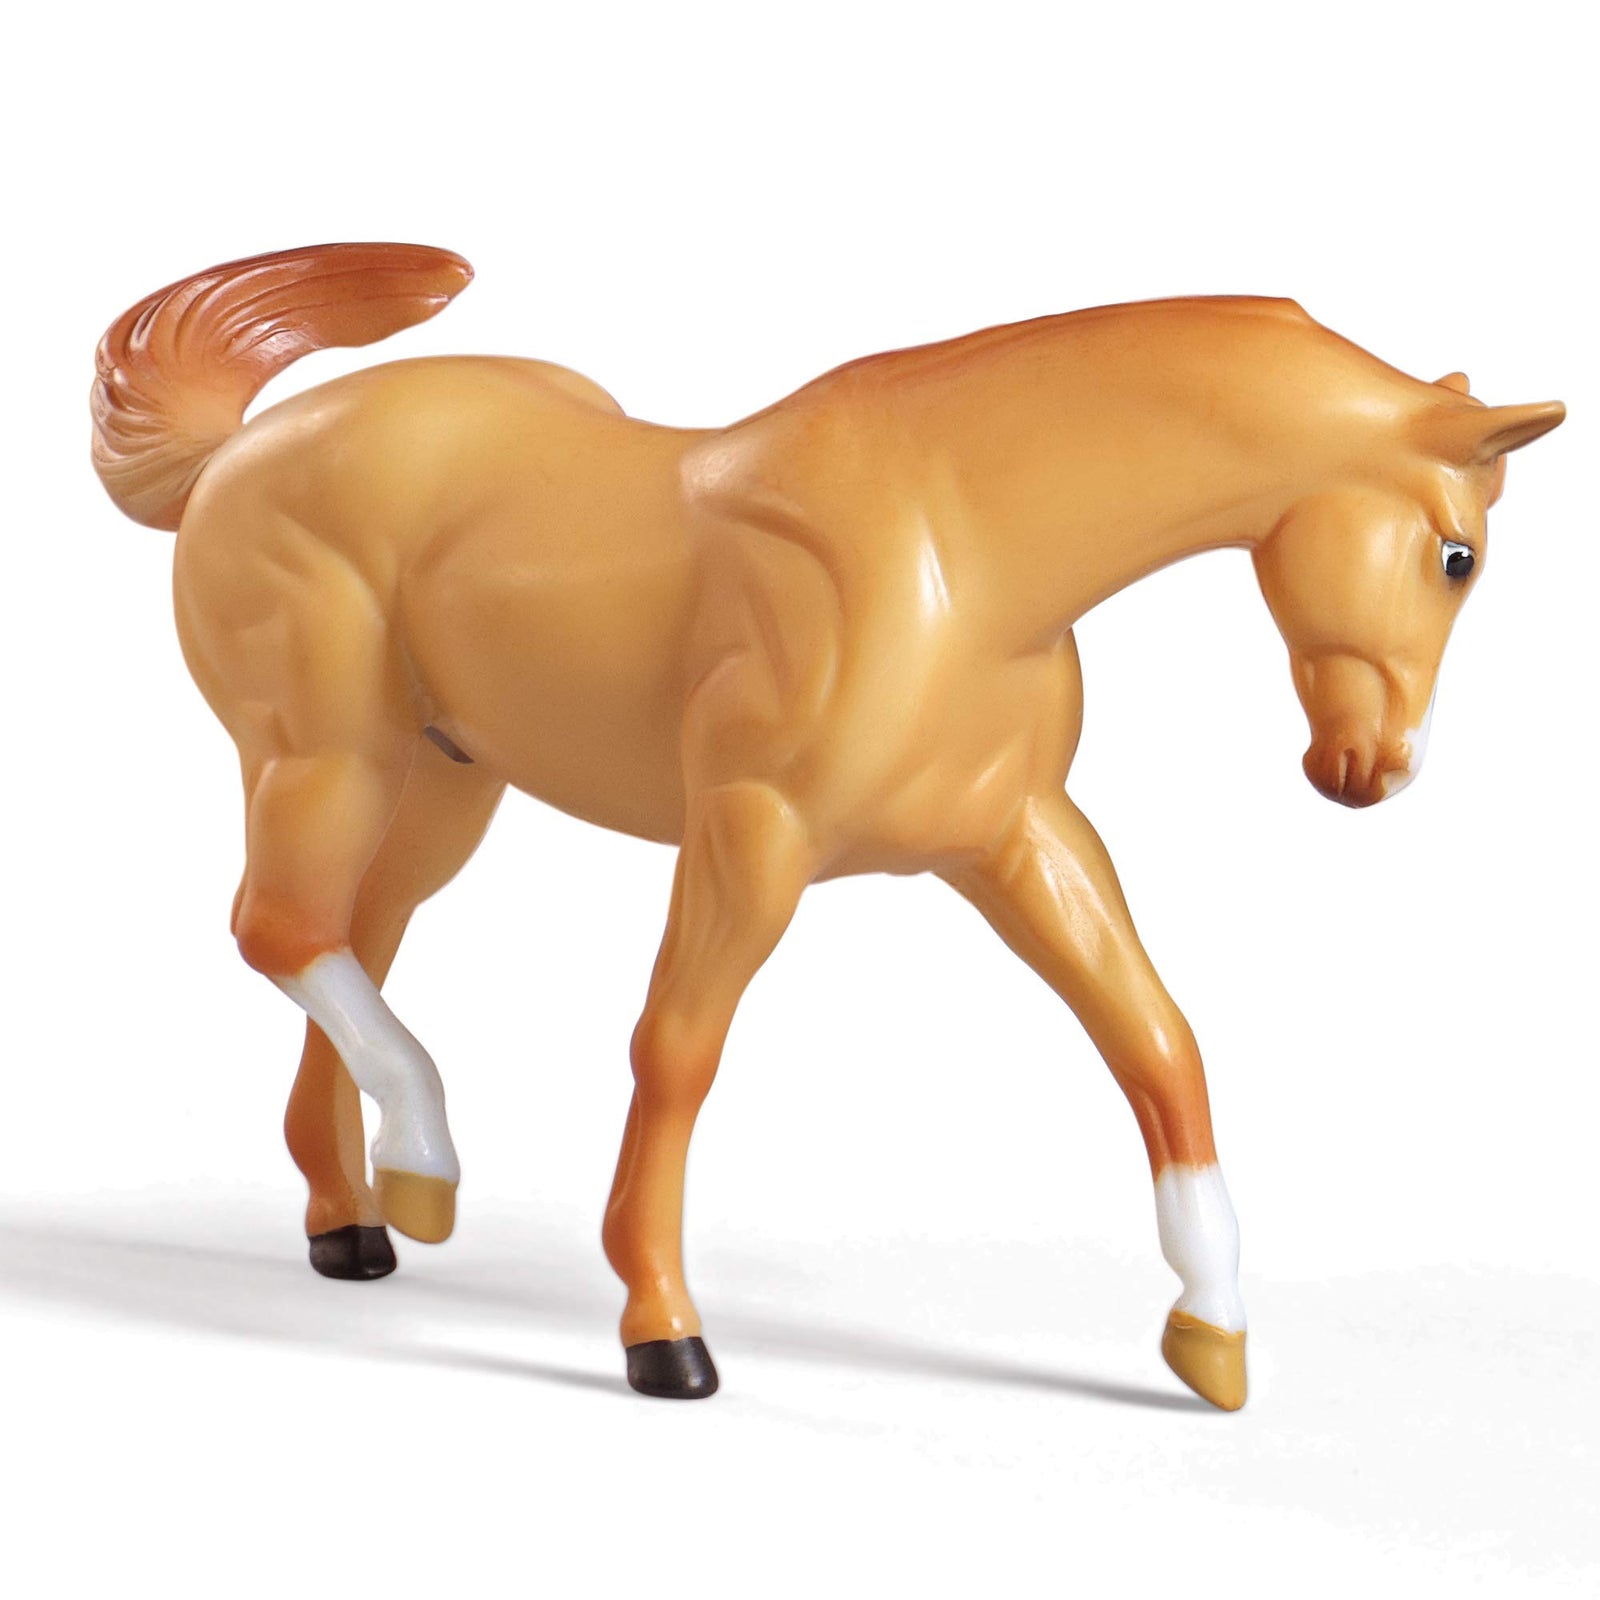 Breyer Stablemates Red Stable and Horse Set | 12 Piece Play set with 2 Horses | 11.5"L x 7.5"W x 9.25"H | 1:32 Scale | Model #59197